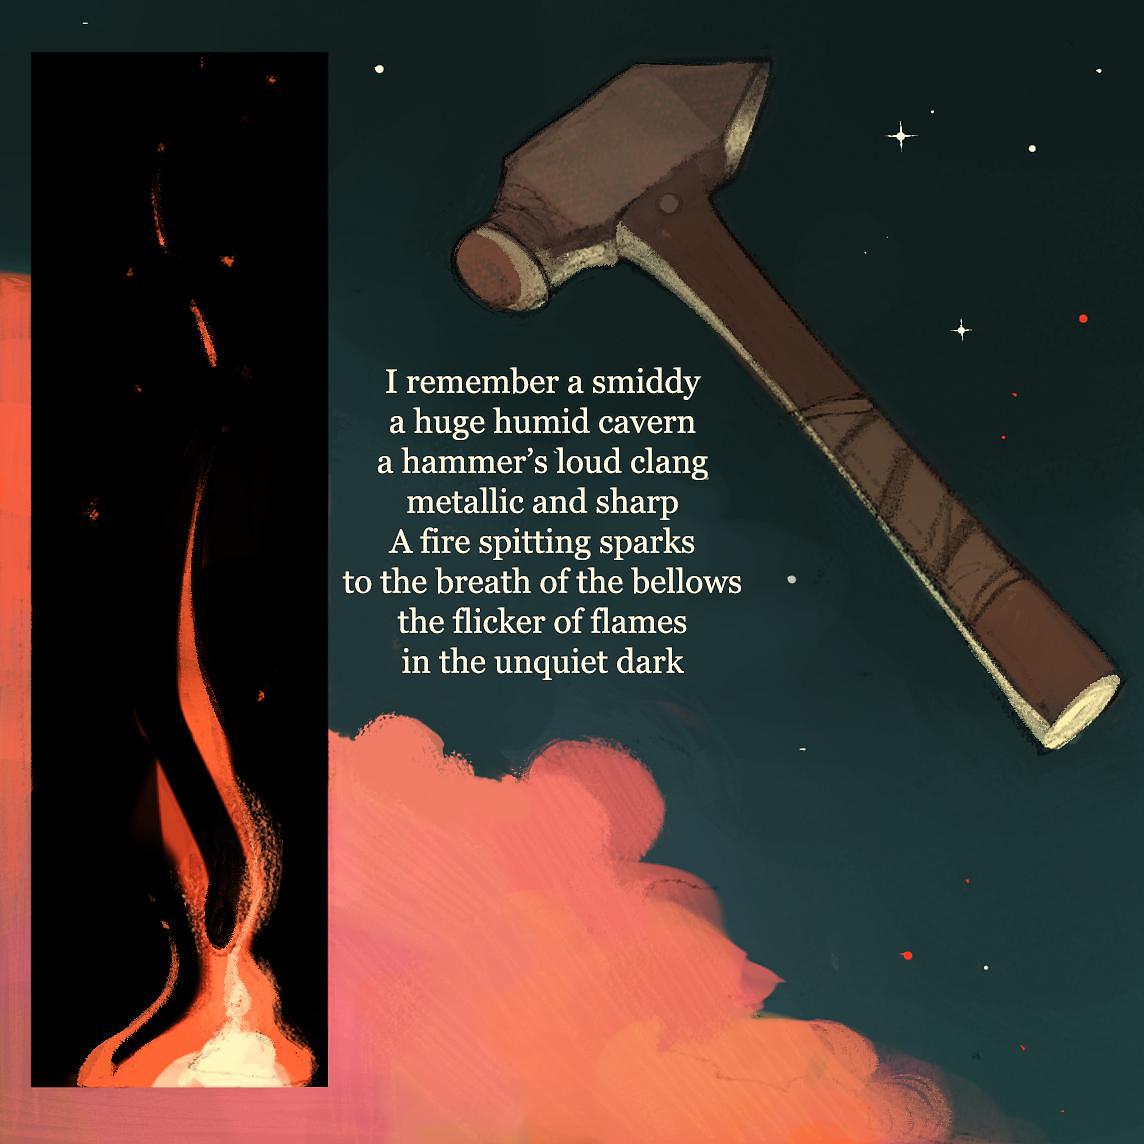 Two panel comic. Comic panel one shows flame in black rectangle. Comic panel two shows metal hammer surrounded by starry sky and pink cloud. The second stanza of Epona is overlaid on the starry sky.